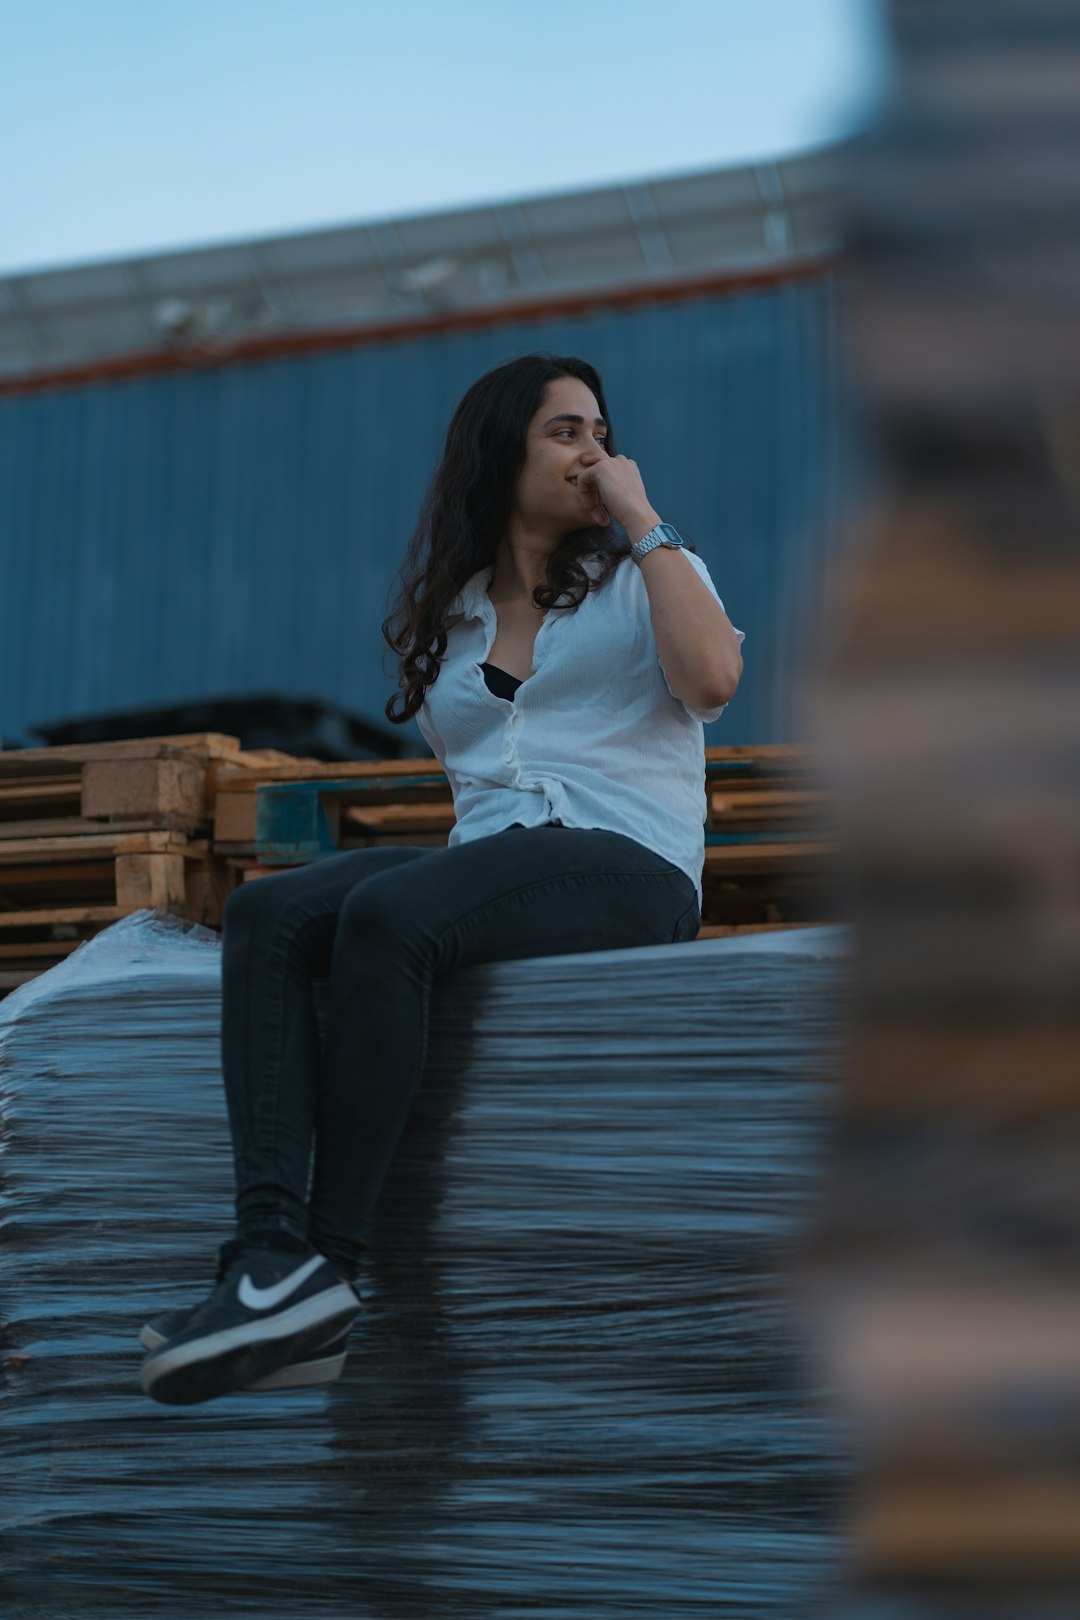 woman in white shirt and blue denim jeans sitting on wooden bench